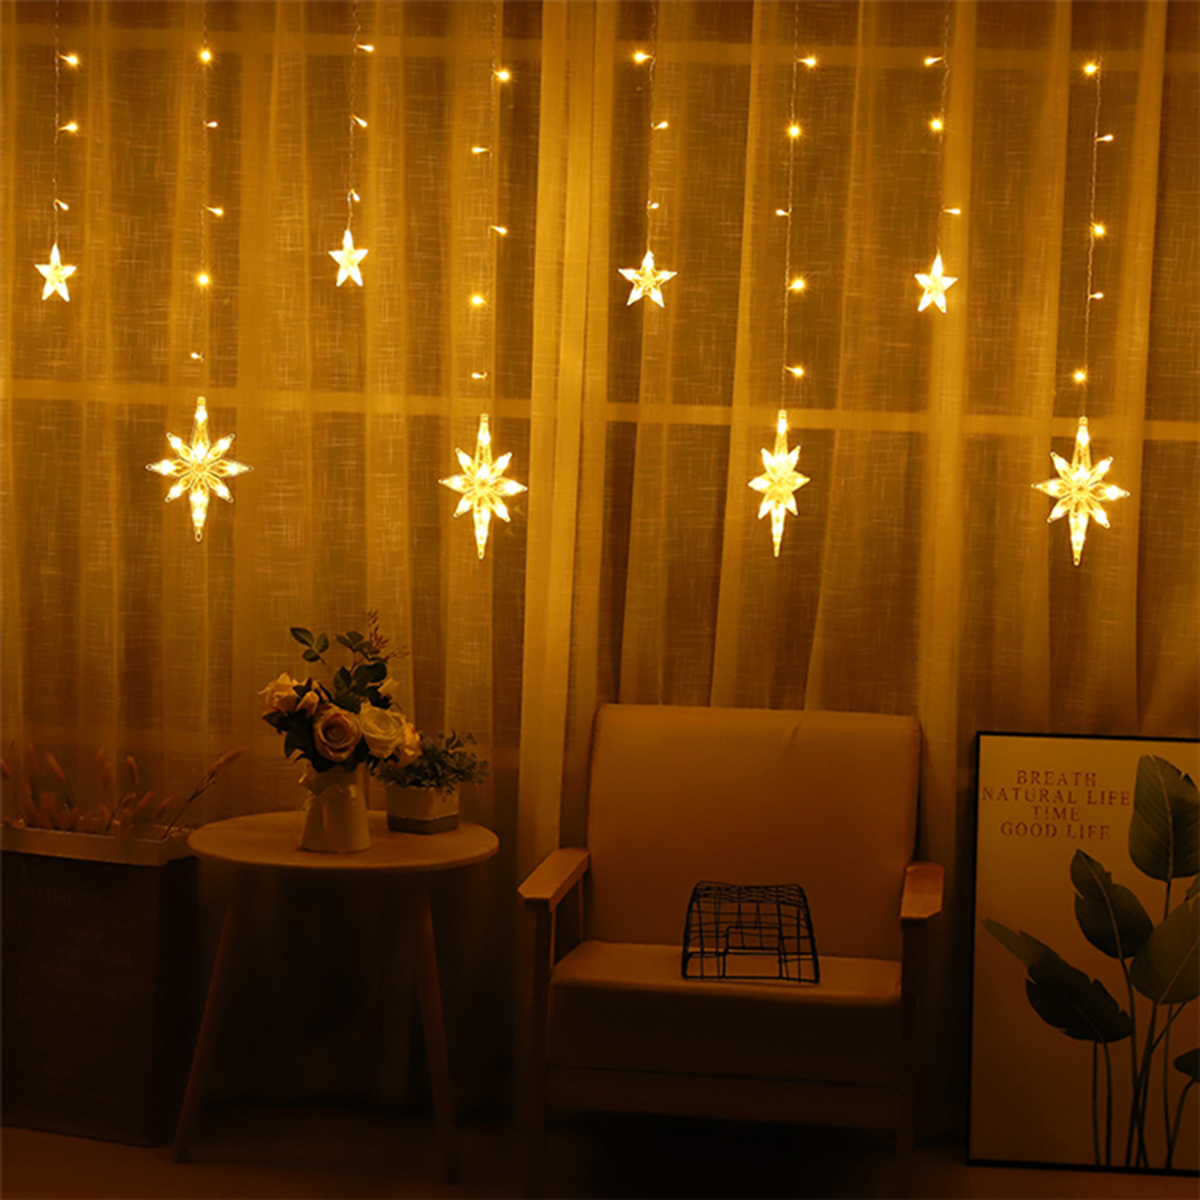 Star Curtain Window String Light LED Fairy Christmas Decorations Lights Holidays Party Wedding Outdoor Garden Lamp